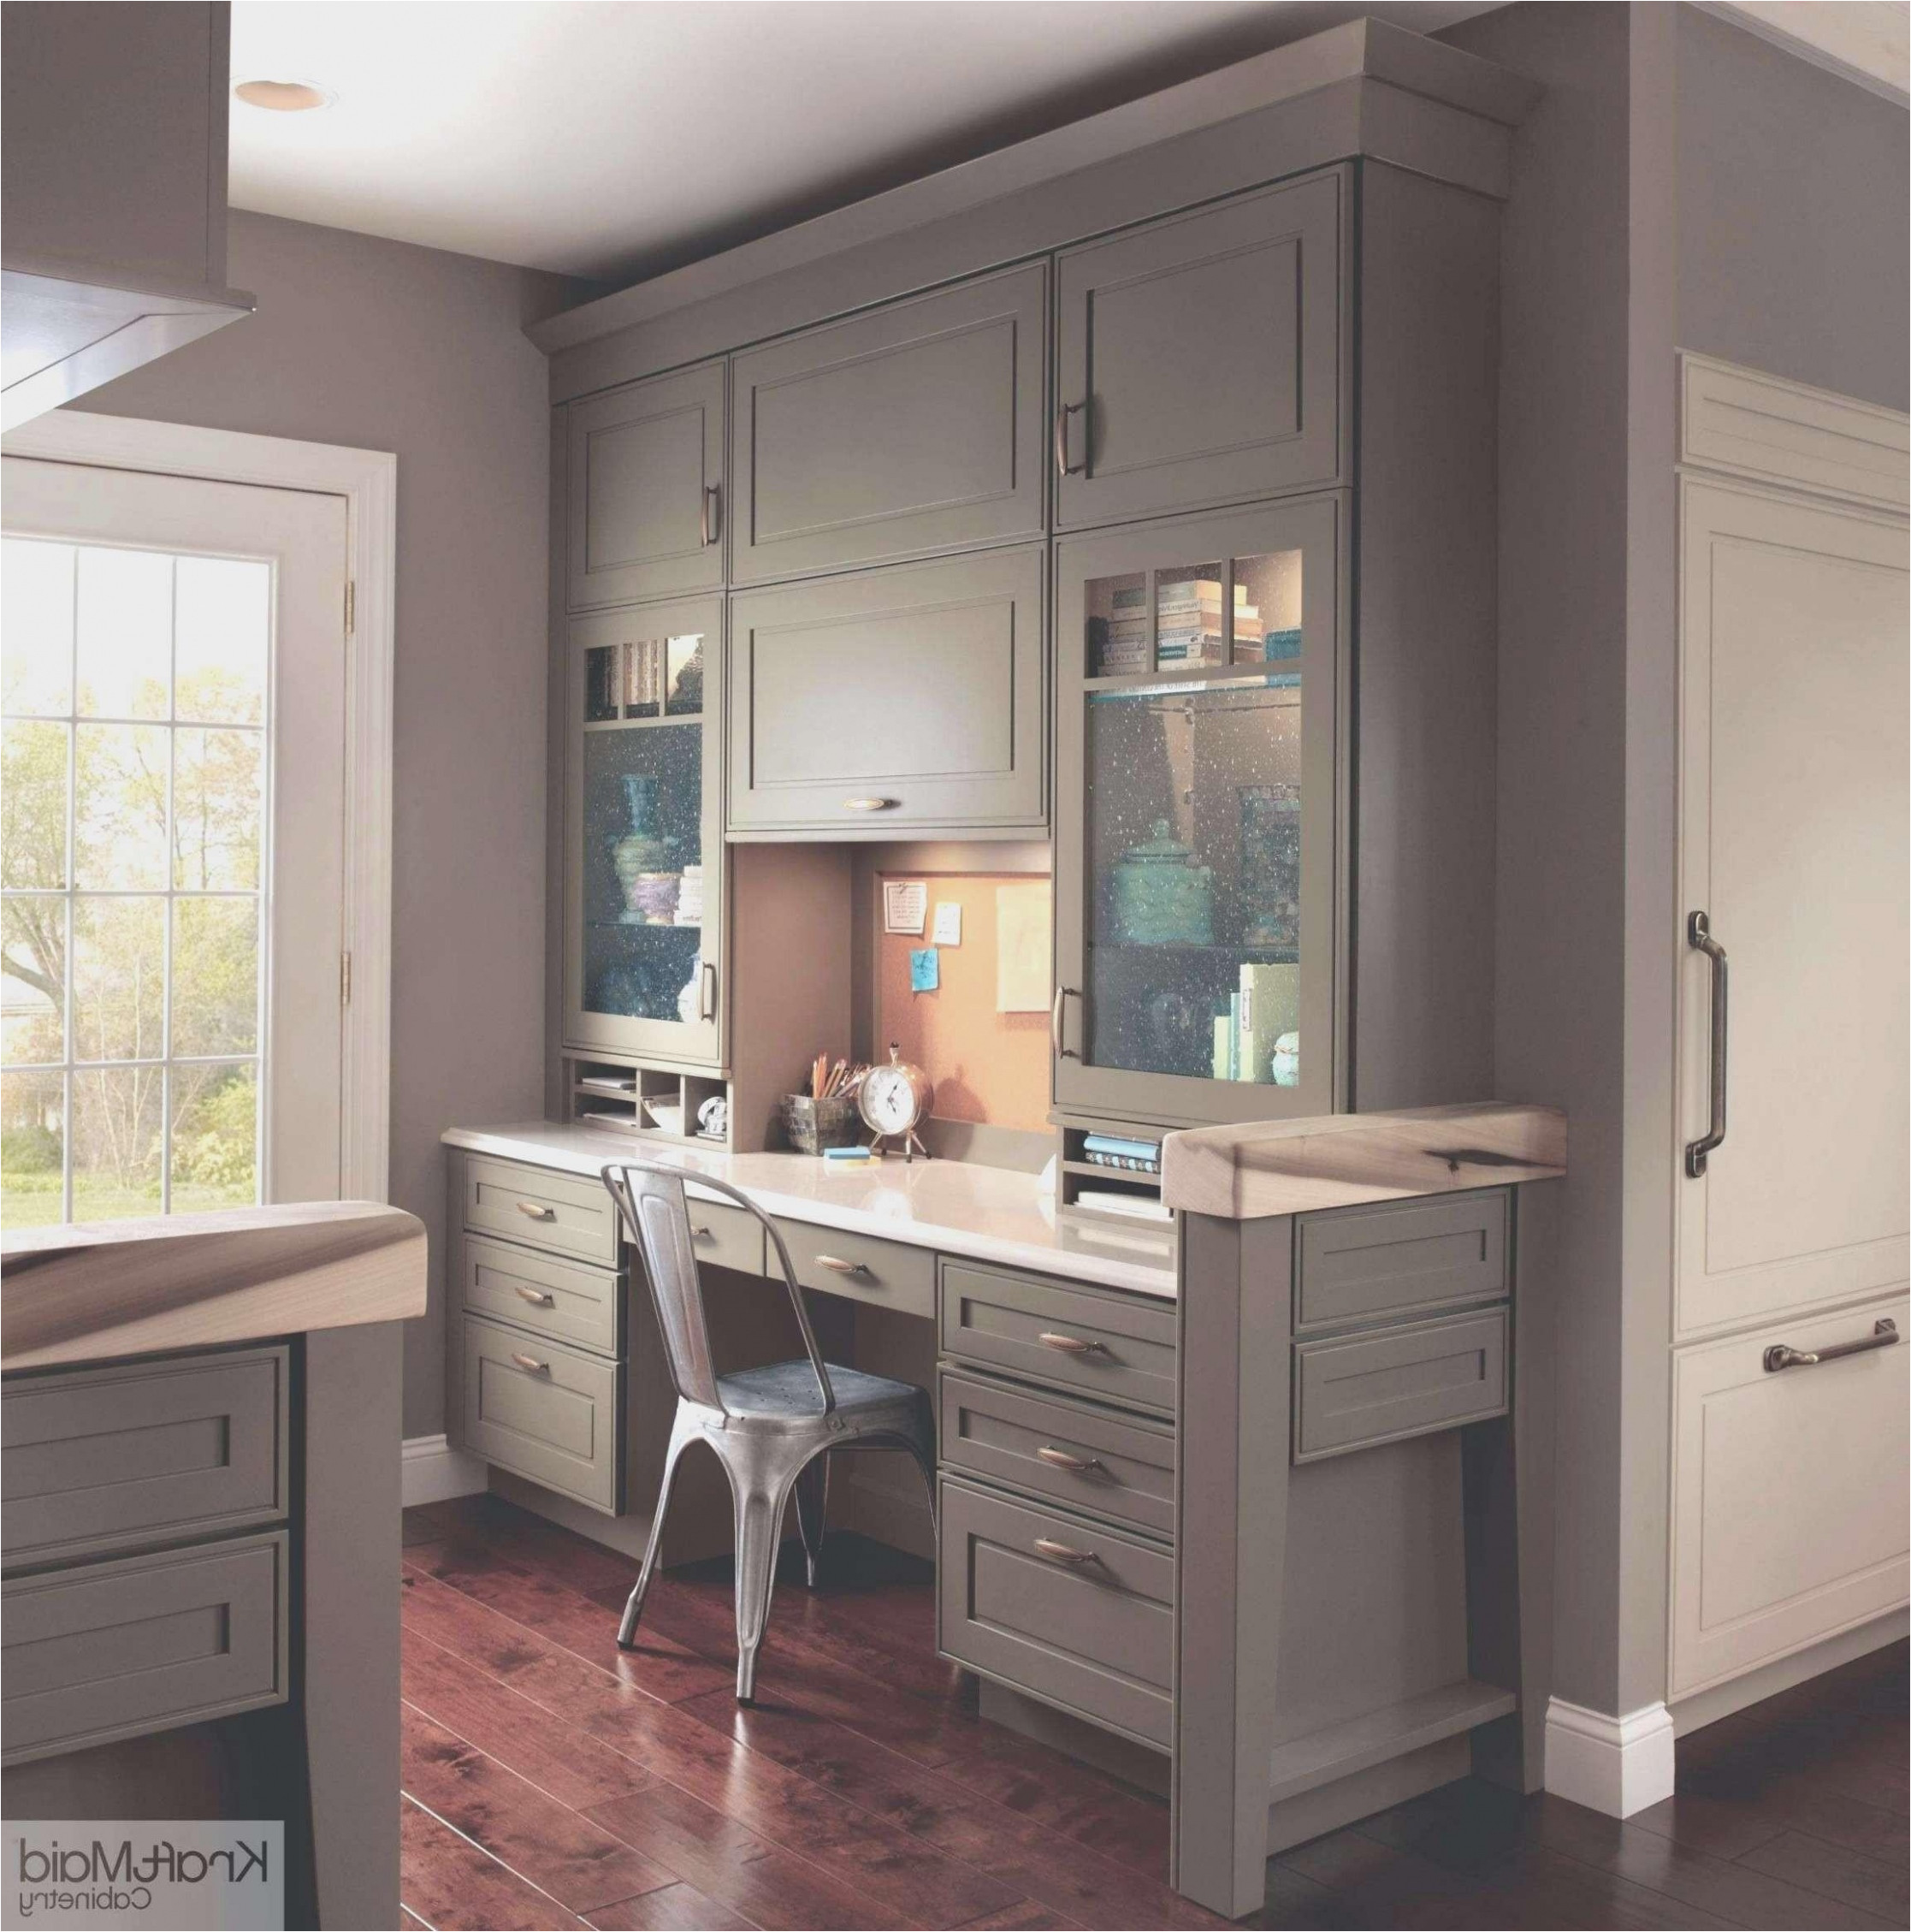 Free Frameless Kitchen Cabinet Plans Recessed Wall Cabinets Rejectedq